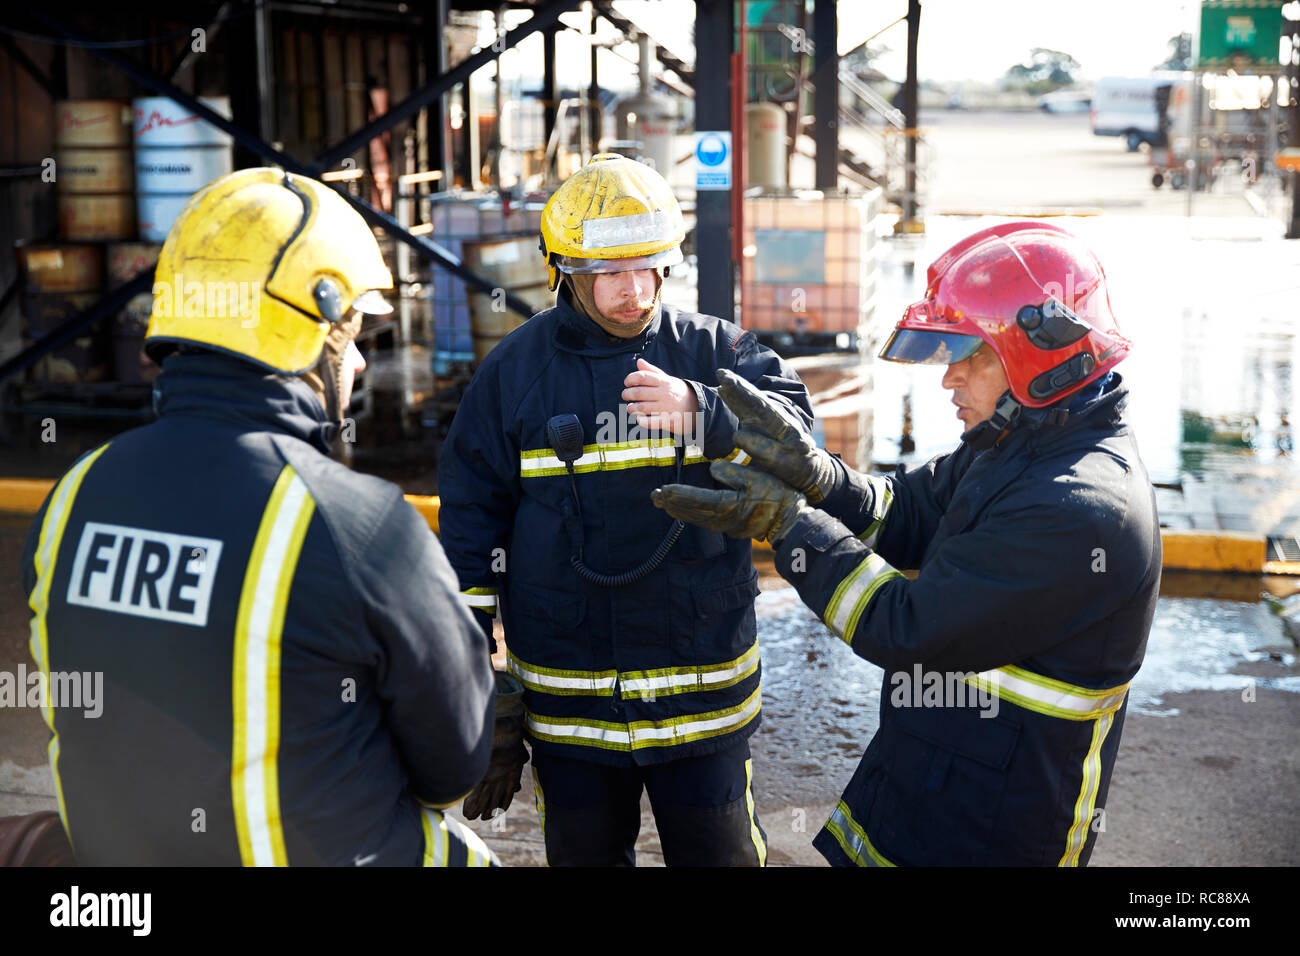 Firemen in discussion in training centre, Darlington, UK Stock Photo